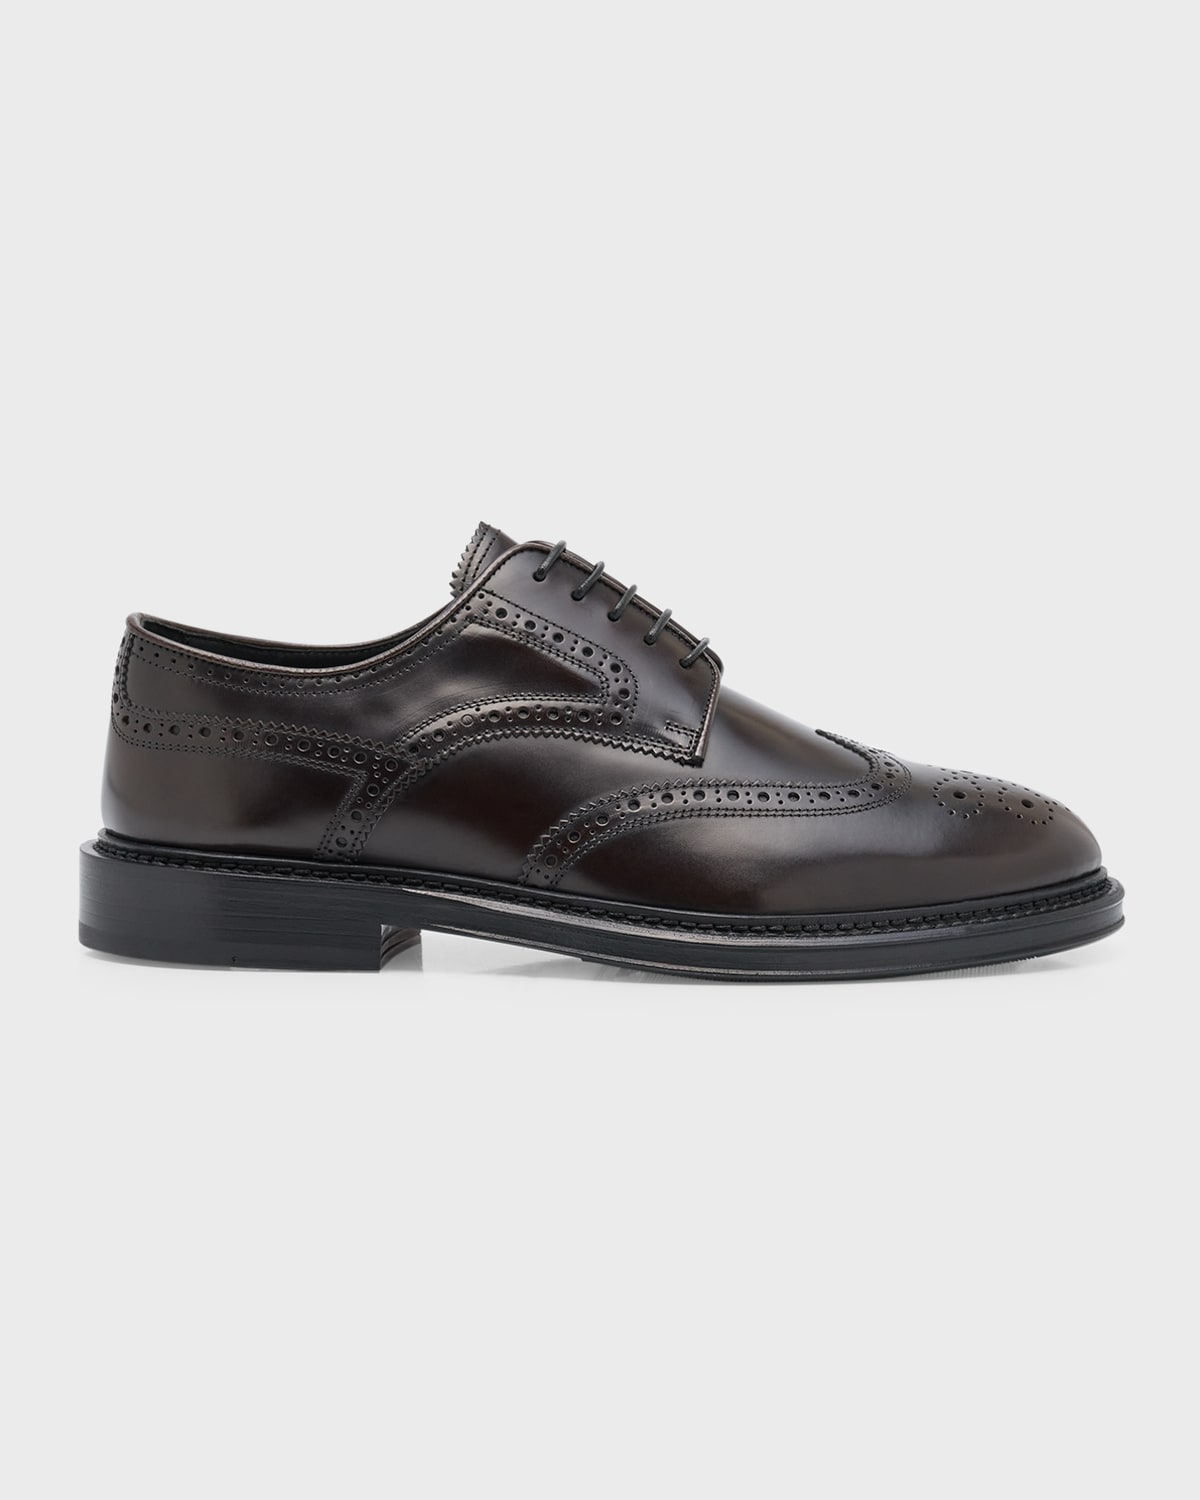 Kiton Men's Wingtip Brogue Leather Derby Shoes In Brwn